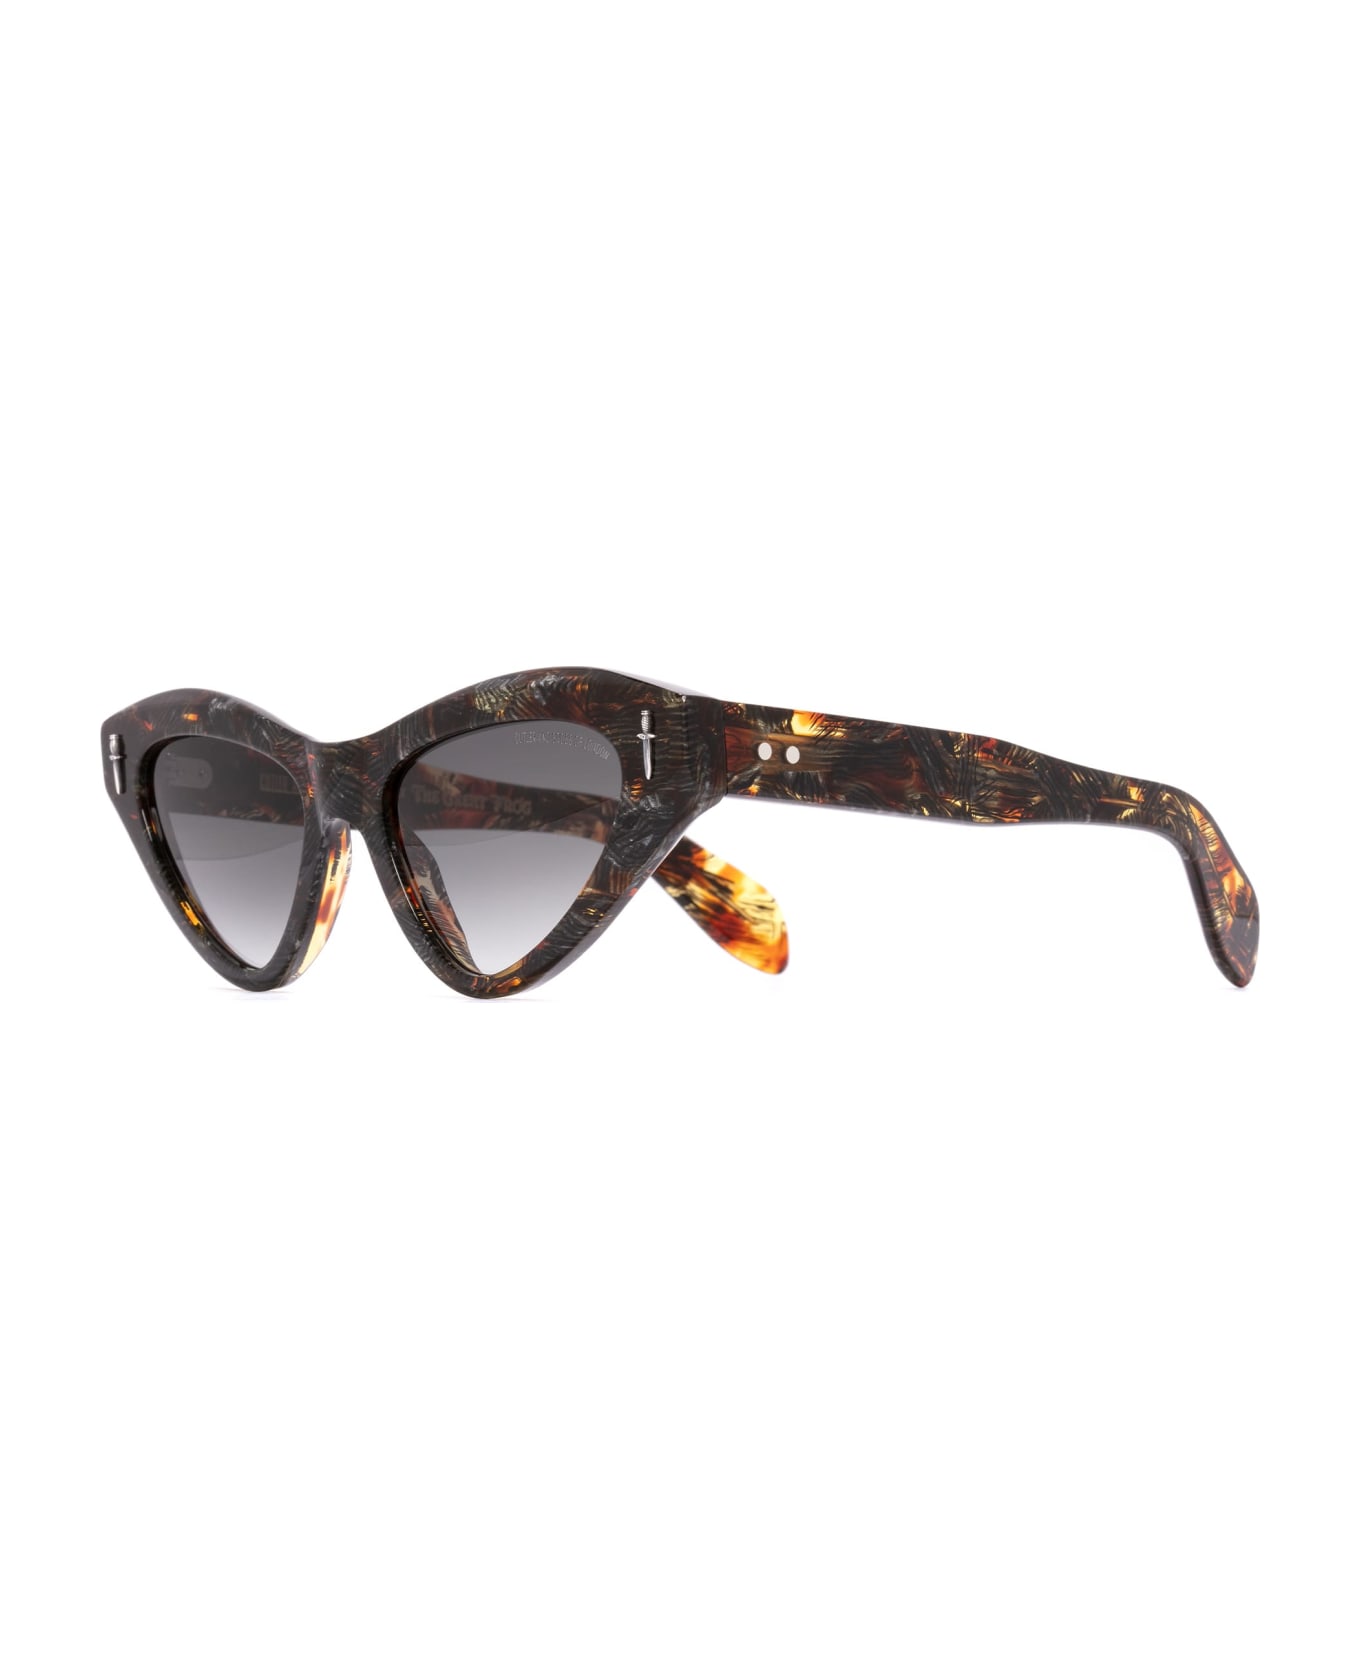 Cutler and Gross The Great Frog - Mini / Brush Stroke Sunglasses - brown